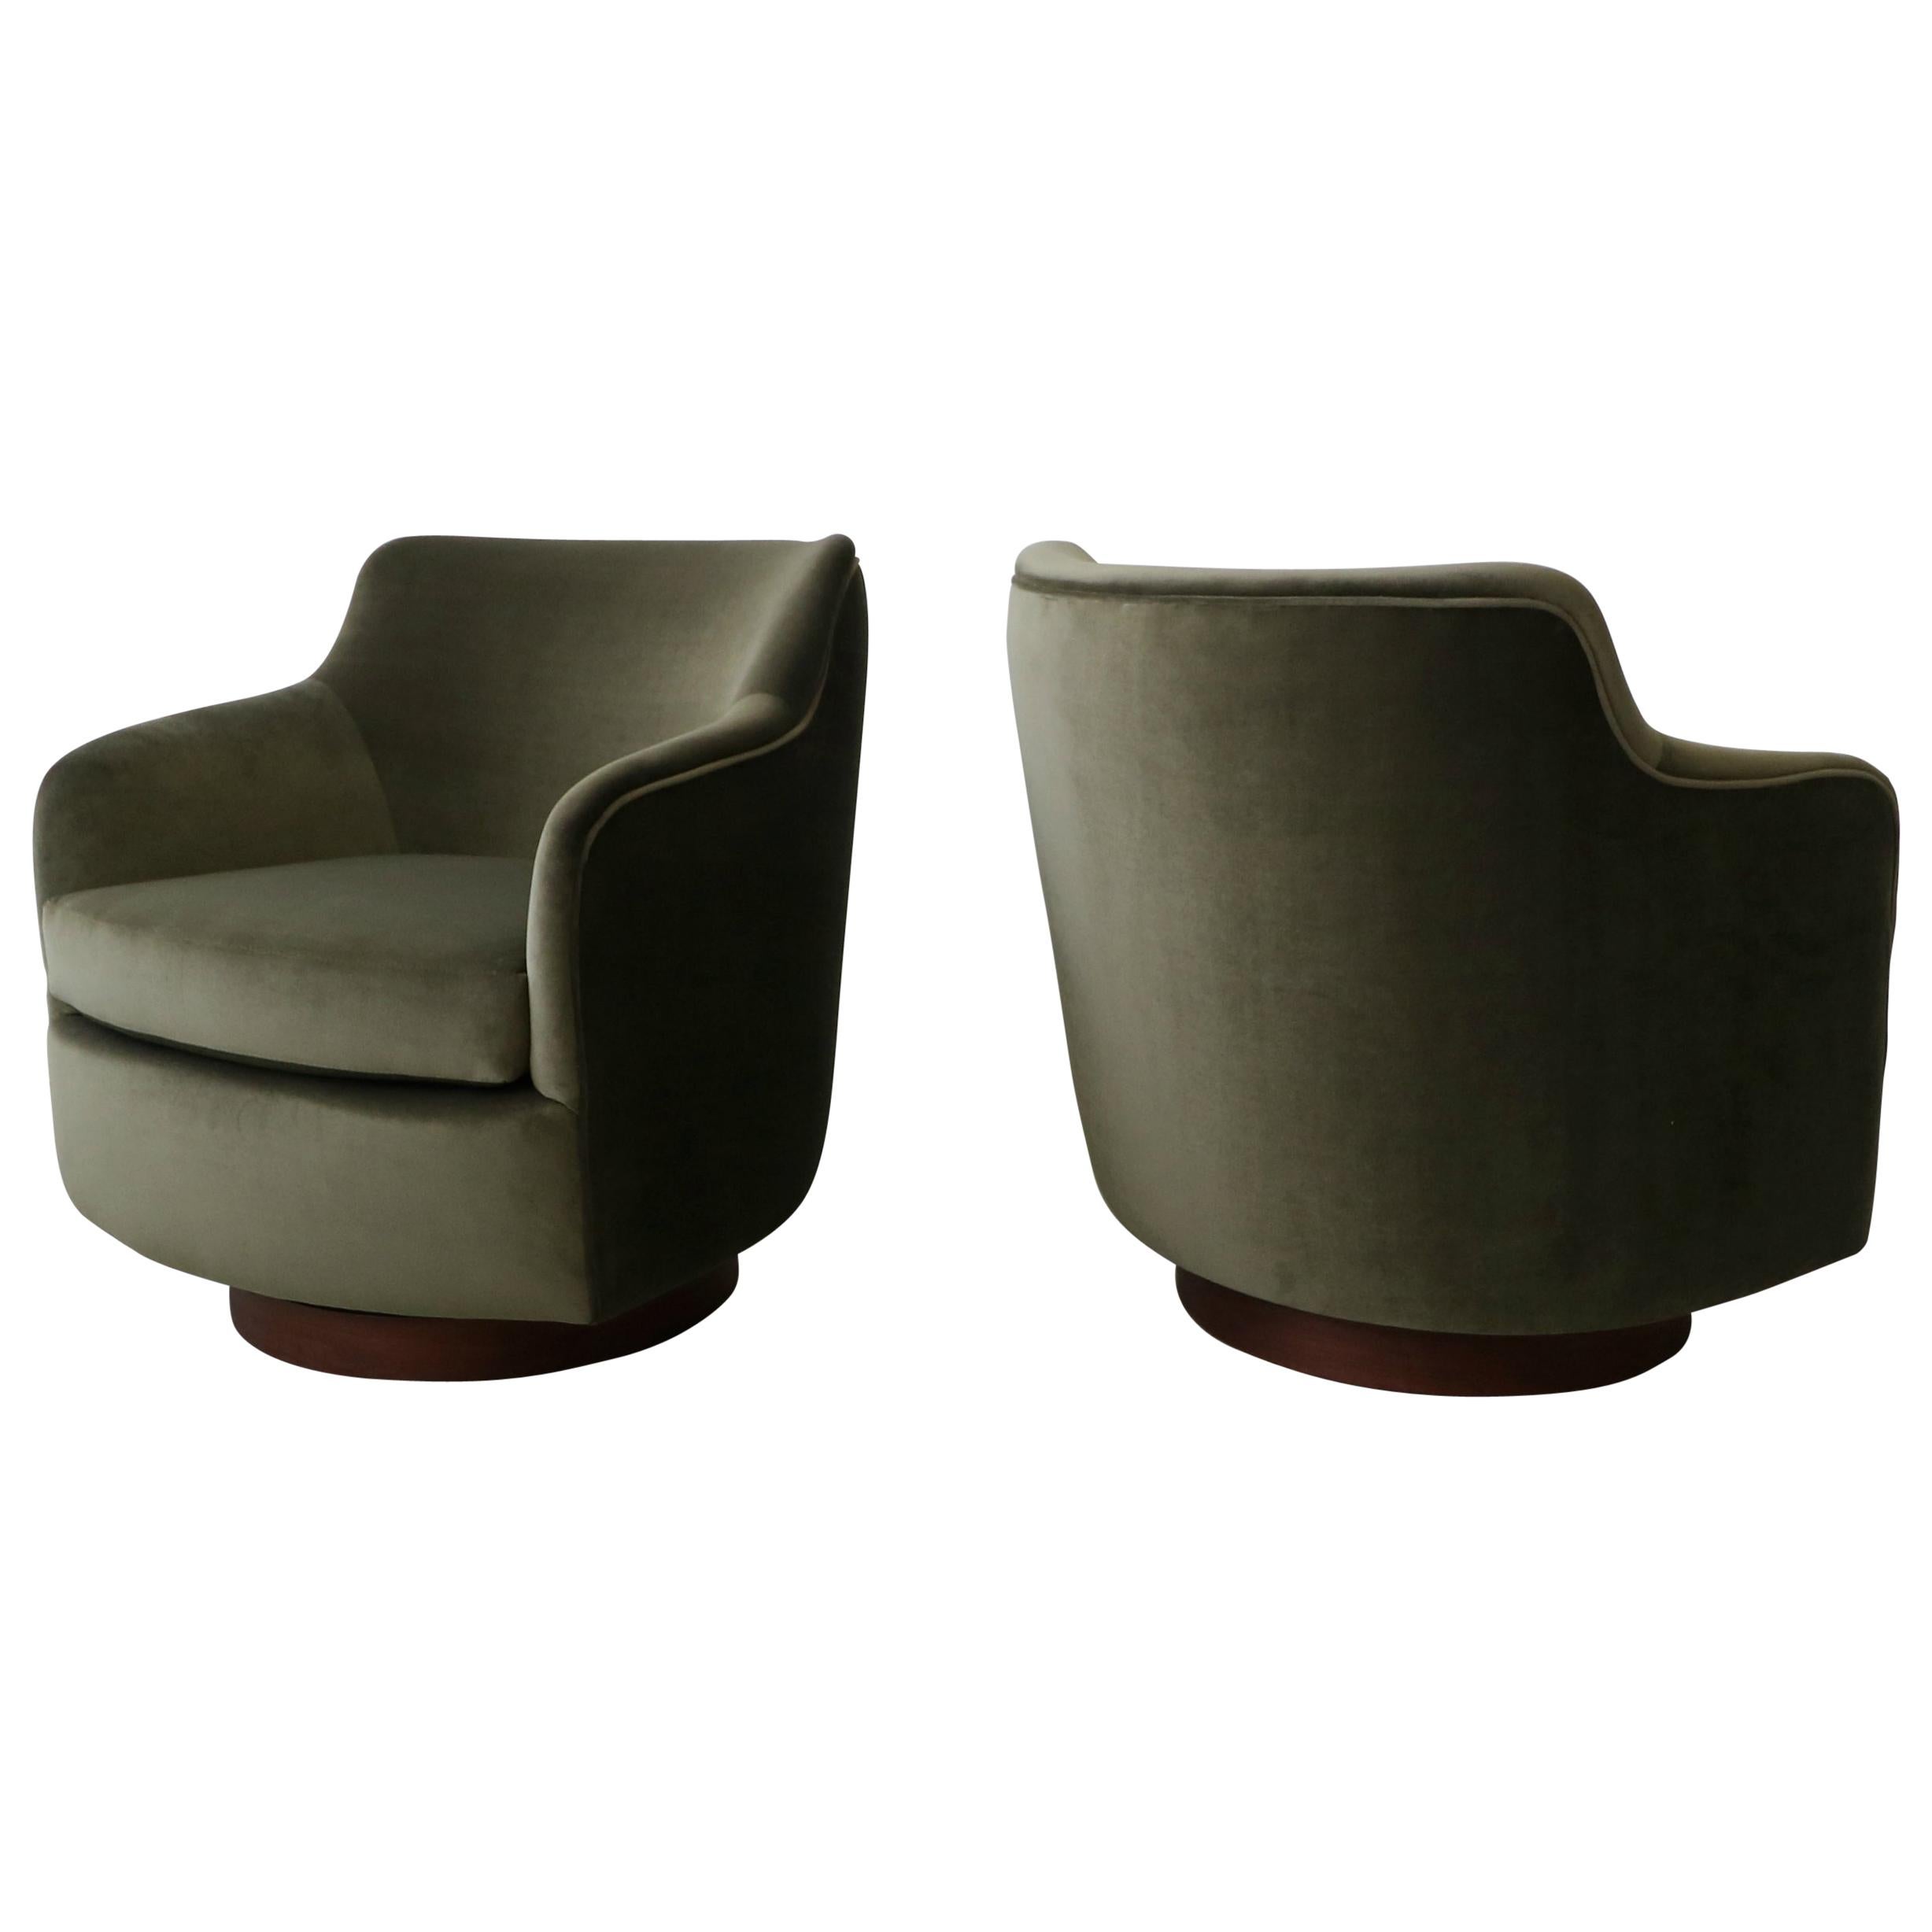 Pair of Midcentury Barrel Back Swivel Chairs by Dunbar